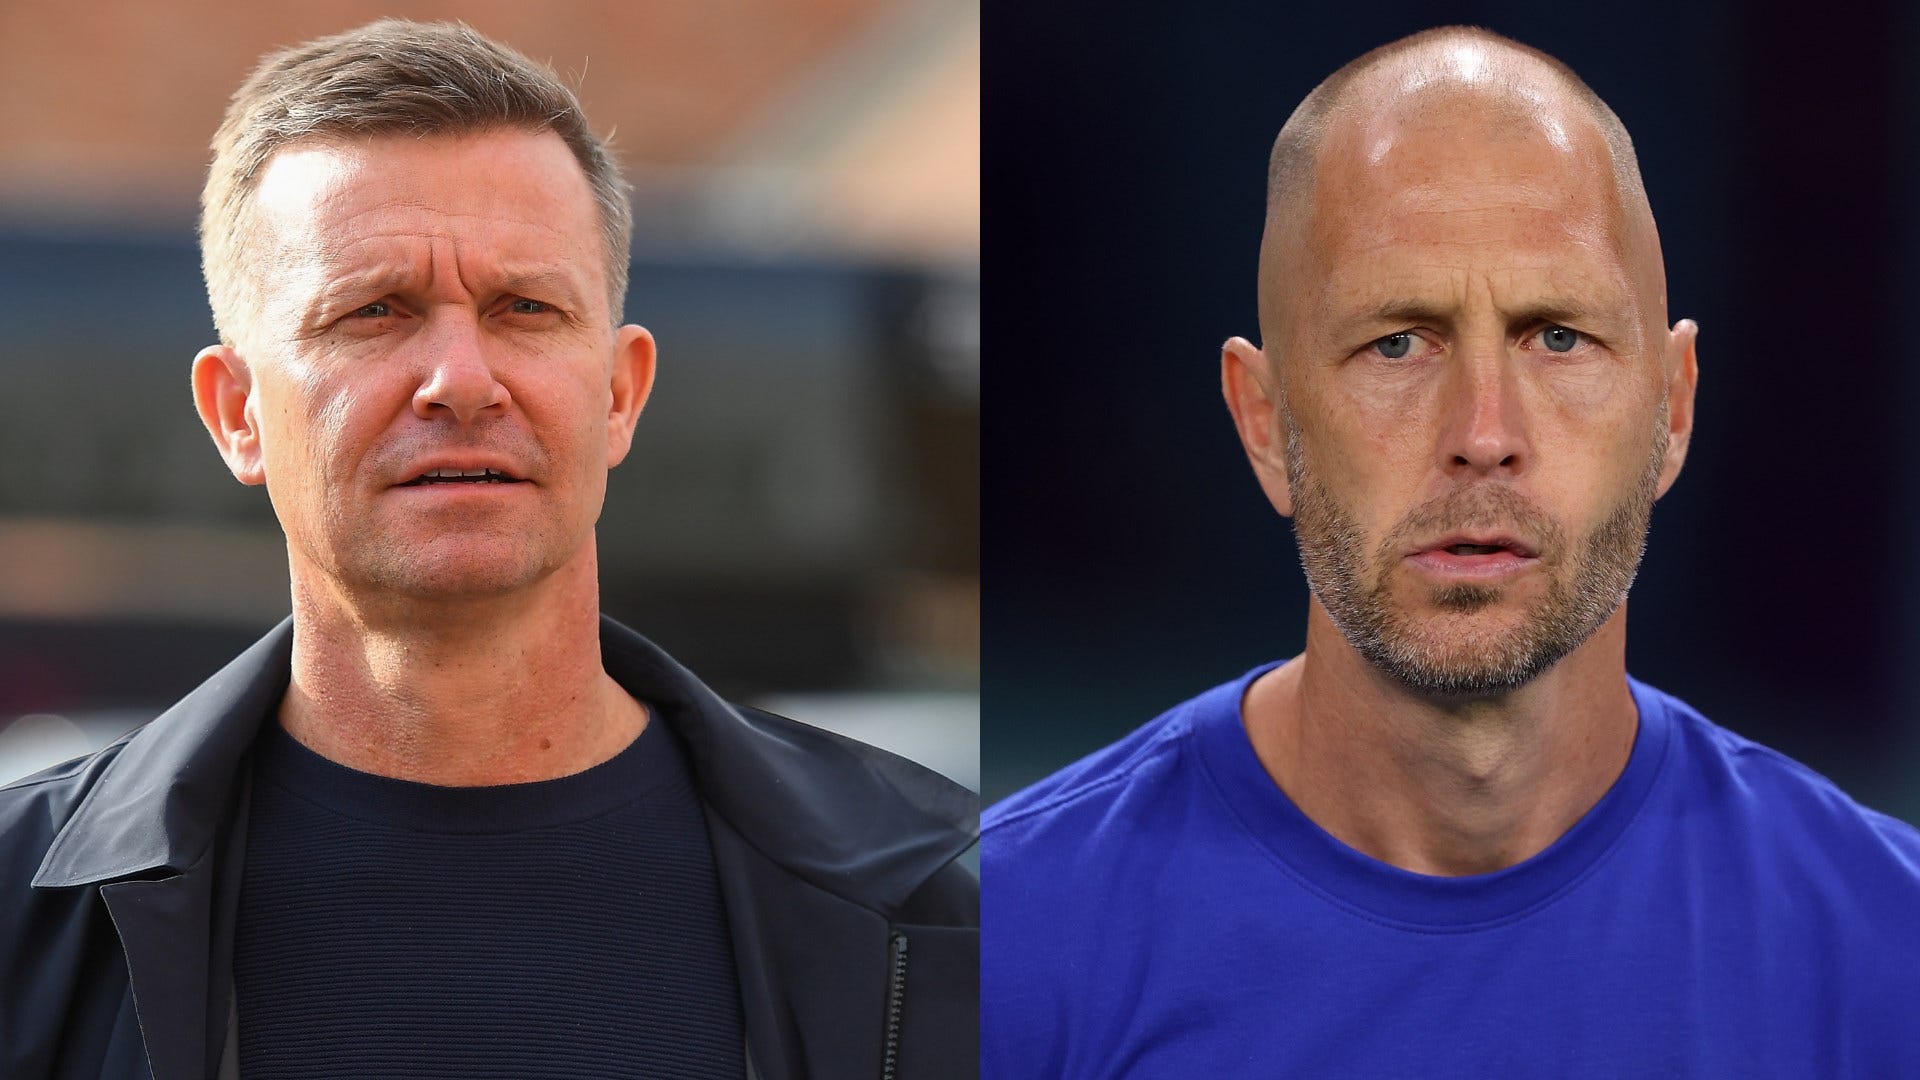 ‘My future lies in Europe’ – Ex-Leeds boss Jesse Marsch gives update on next managerial role after missing out on USMNT job to Gregg Berhalter | Goal.com US